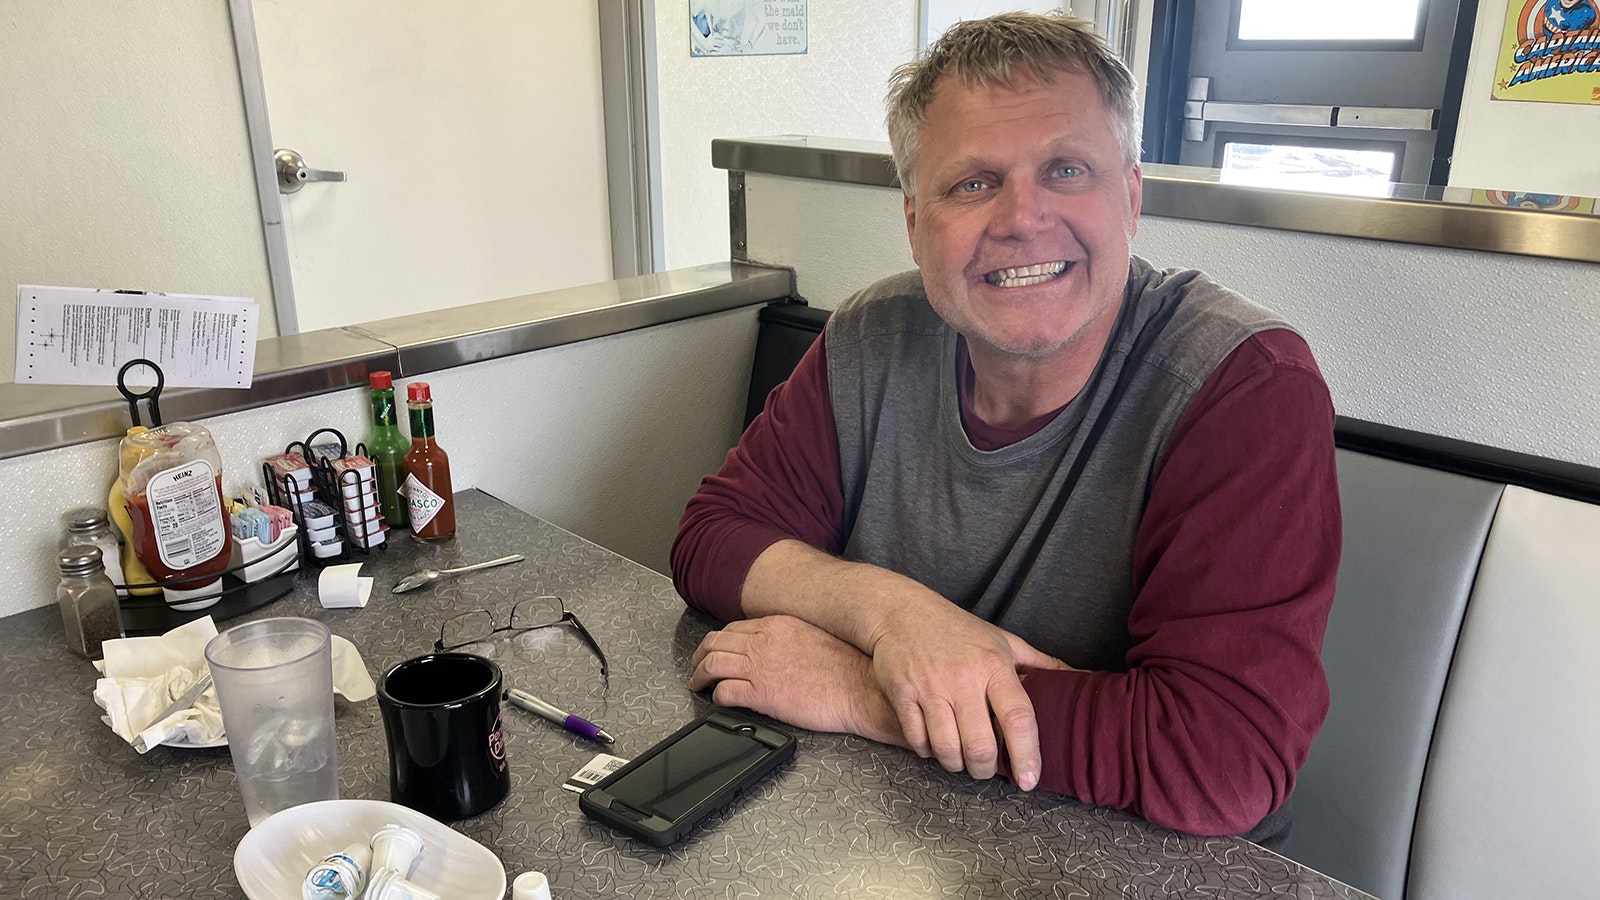 Trucking company owner Gerald Koble said he stops at the Penny’s Diner often  traveling on Highway 59 on his way to deliver fuel to drilling rigs and fracking operations.